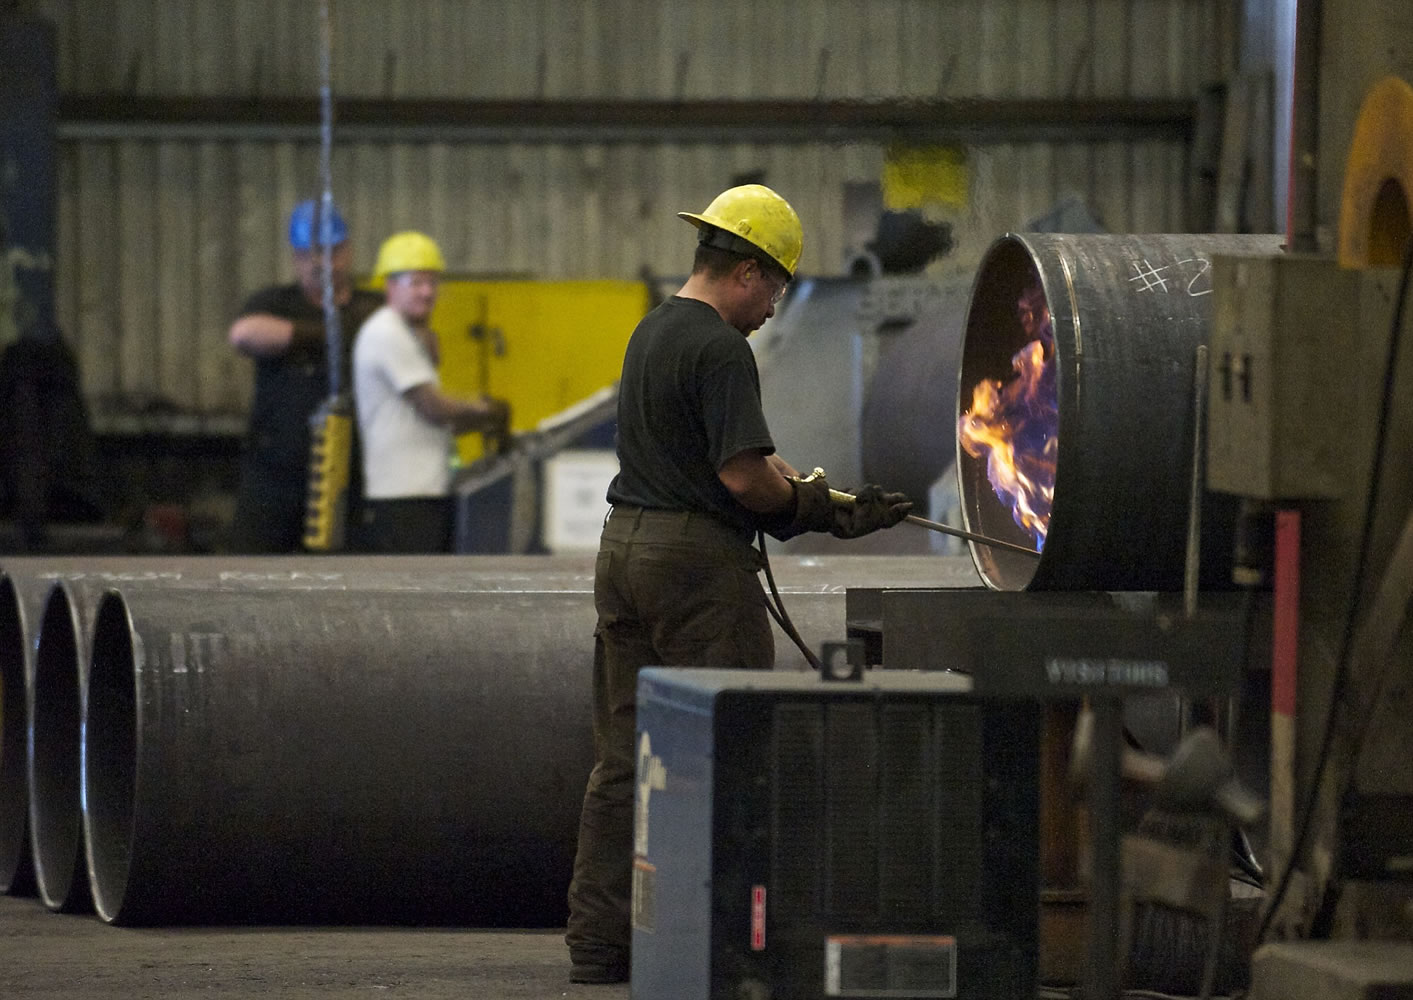 An employee fires up a torch inside the Thompson Metal Fab facility during a tour in July 2013.